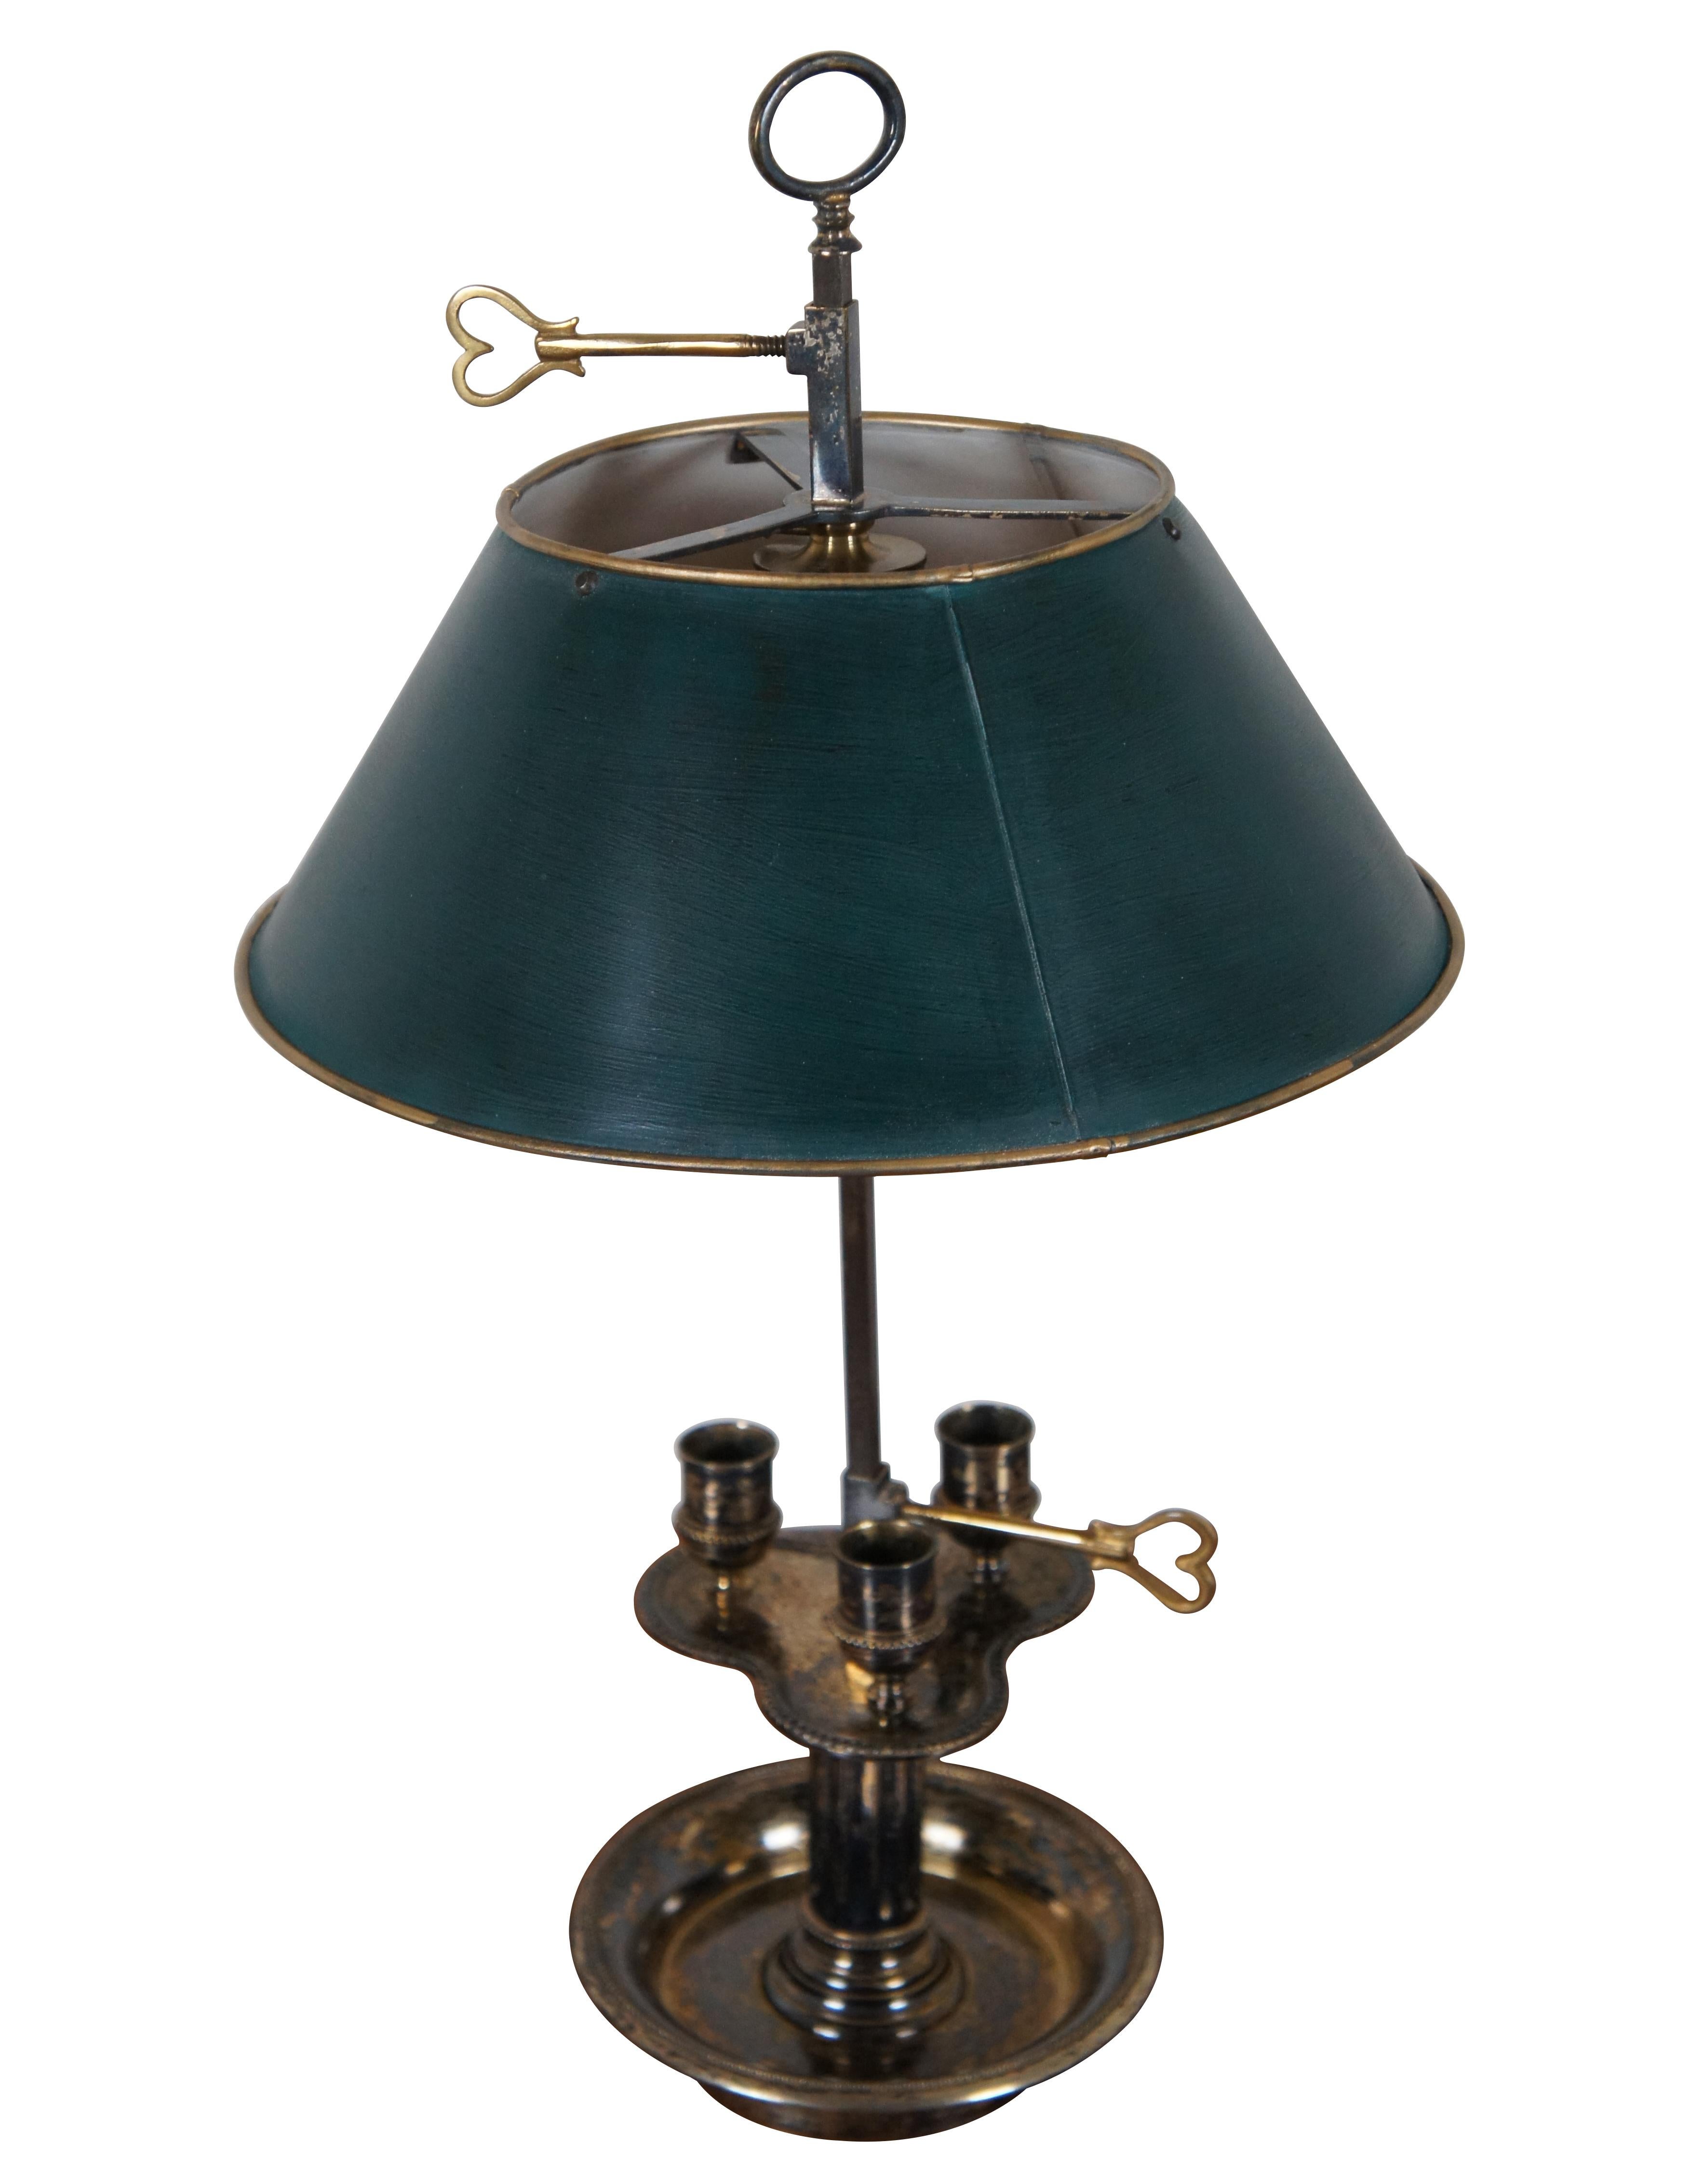 Antique French Neoclassical Bouillotte / Directoire / Hot Water Bottle silver plate three light table lamp, featuring a fluted column with round dish base supporting a three candle tray (height adjustable), with ring finial and heart shaped screw